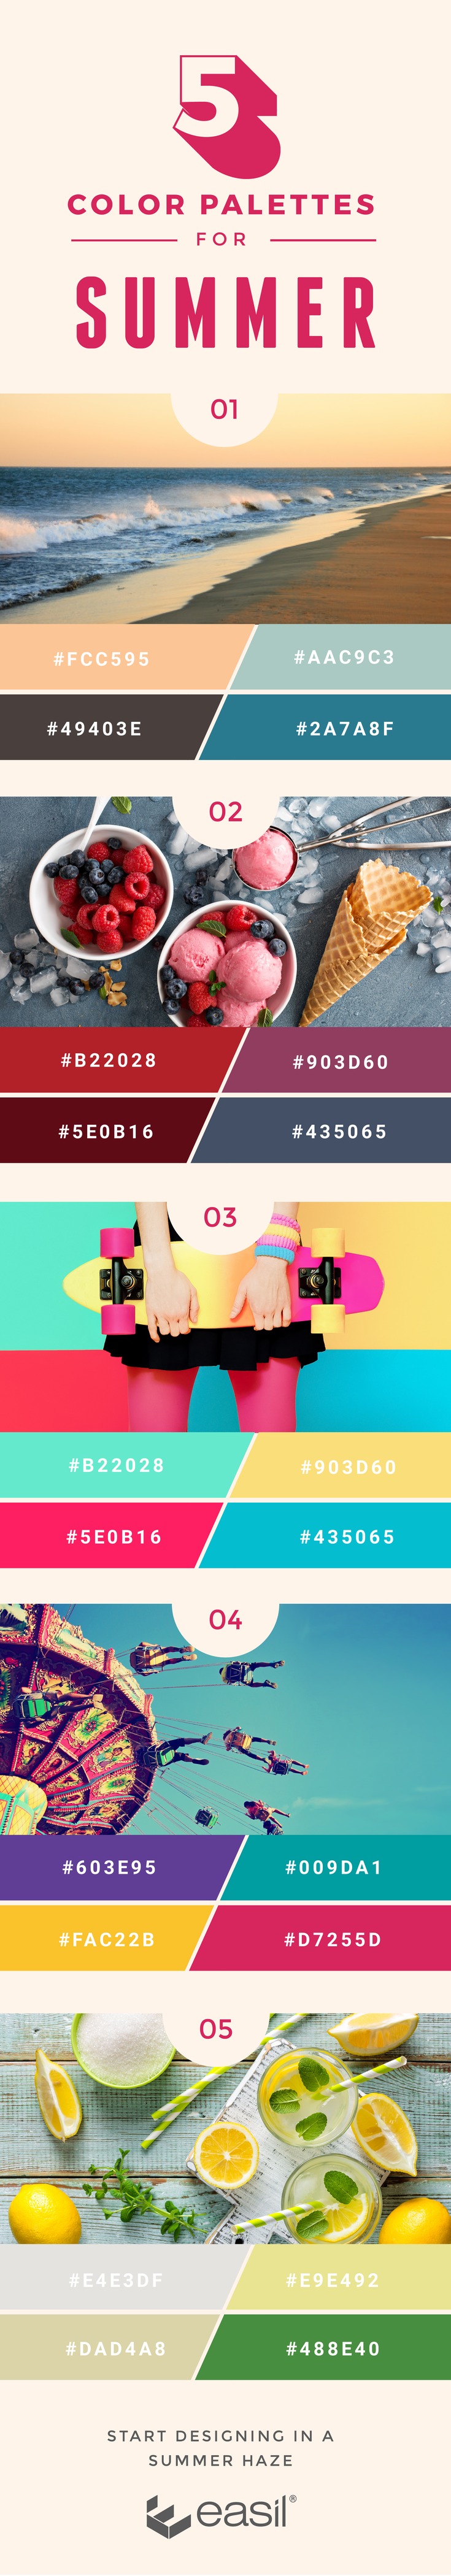 5 Color Palettes for Summer-Ready Design (and What Makes Them Work) - Infographic and color codes to start using straight away in your designs!